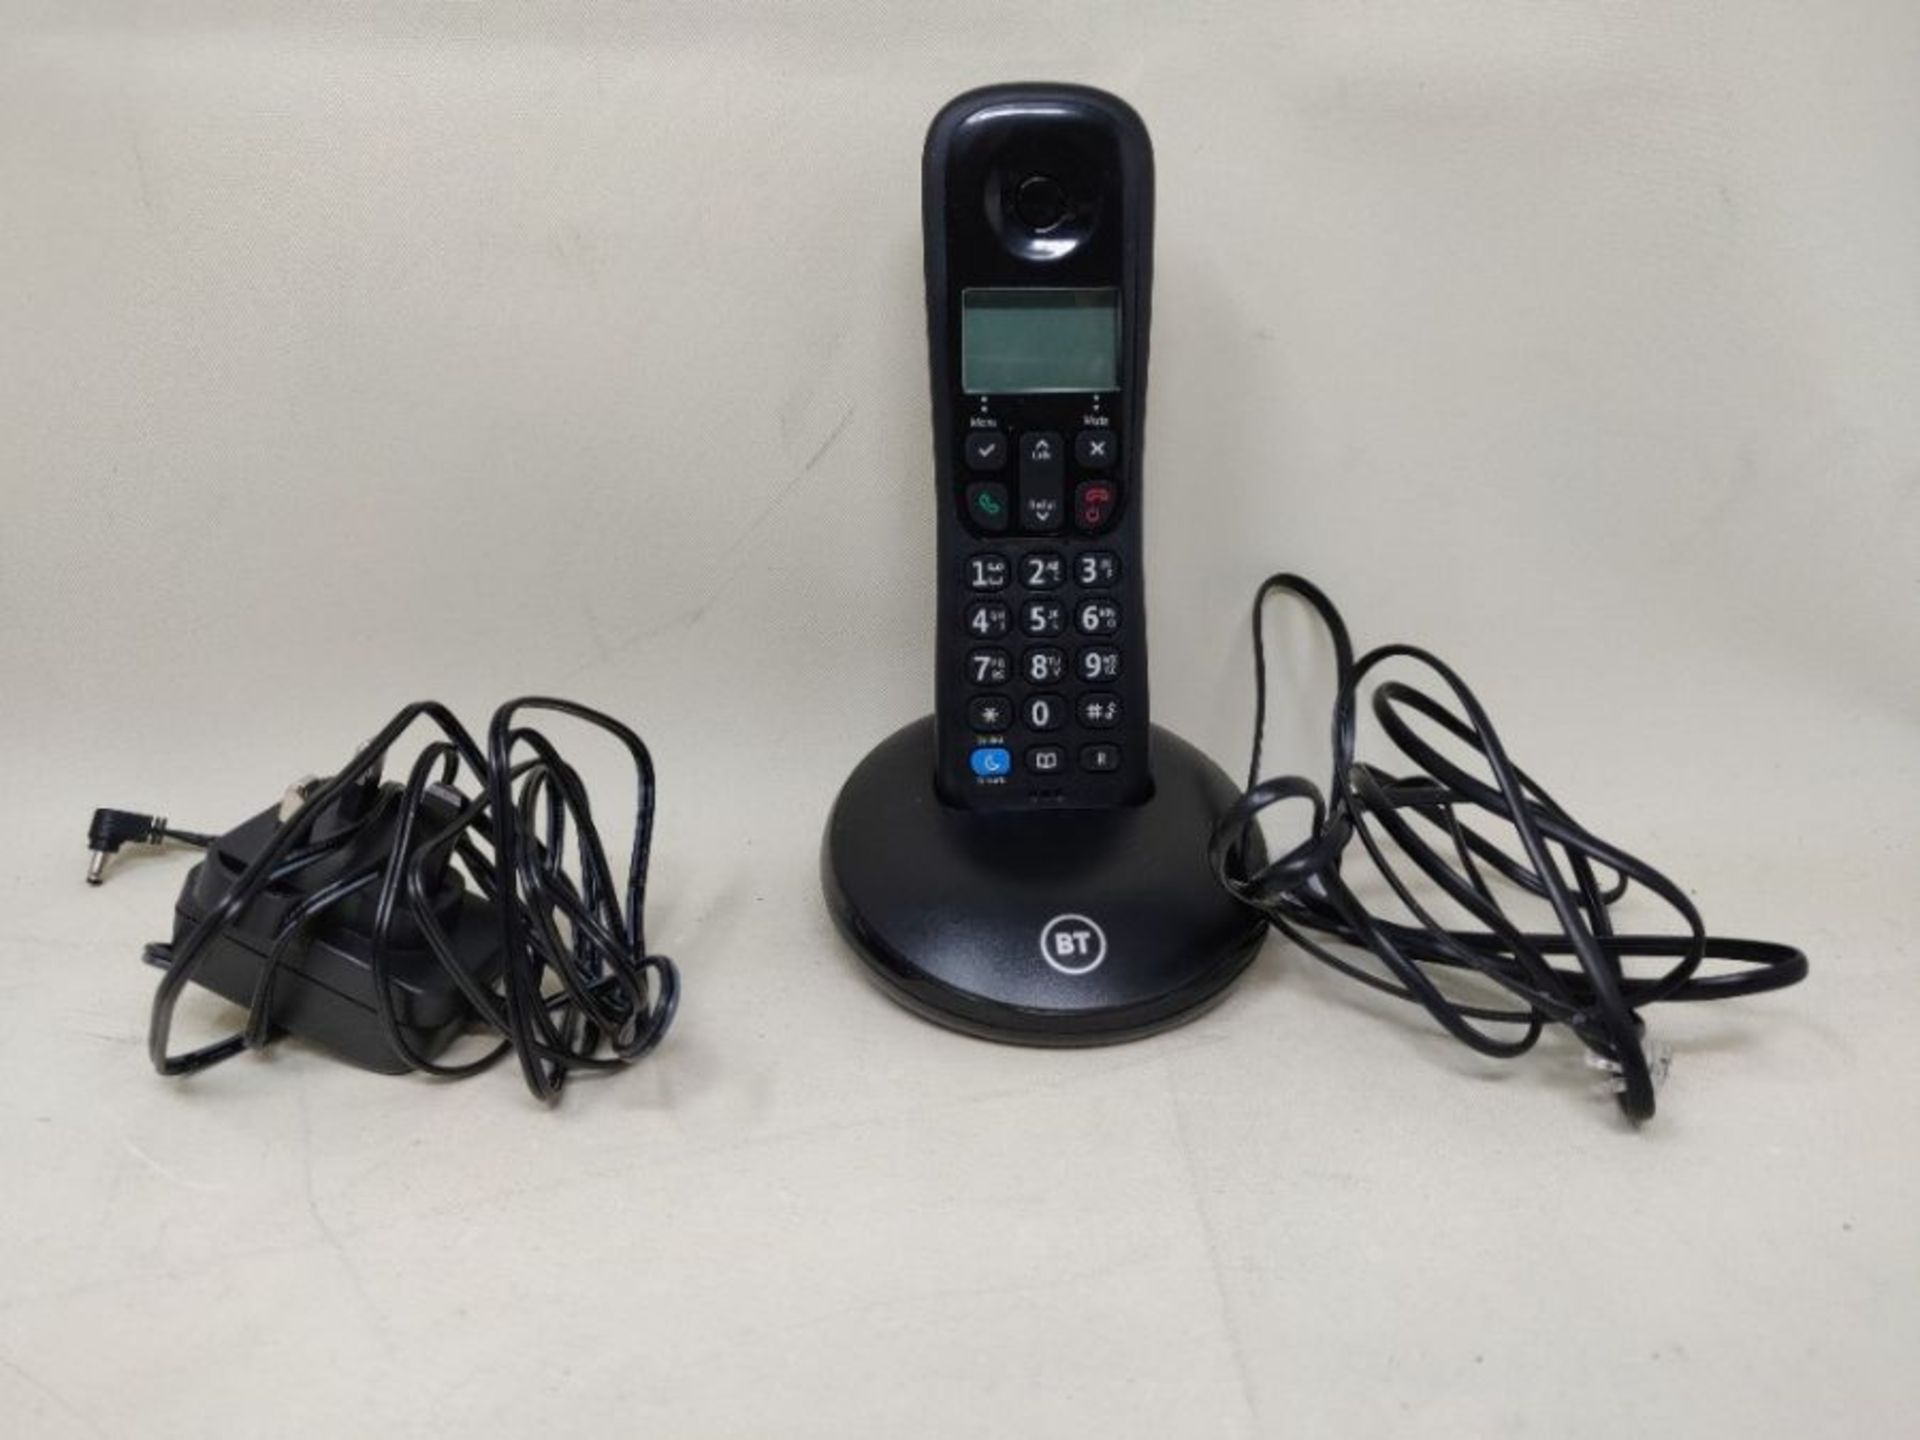 BT Everyday Cordless Home Phone with Basic Call Blocking, Single Handset Pack, Black - Image 2 of 2